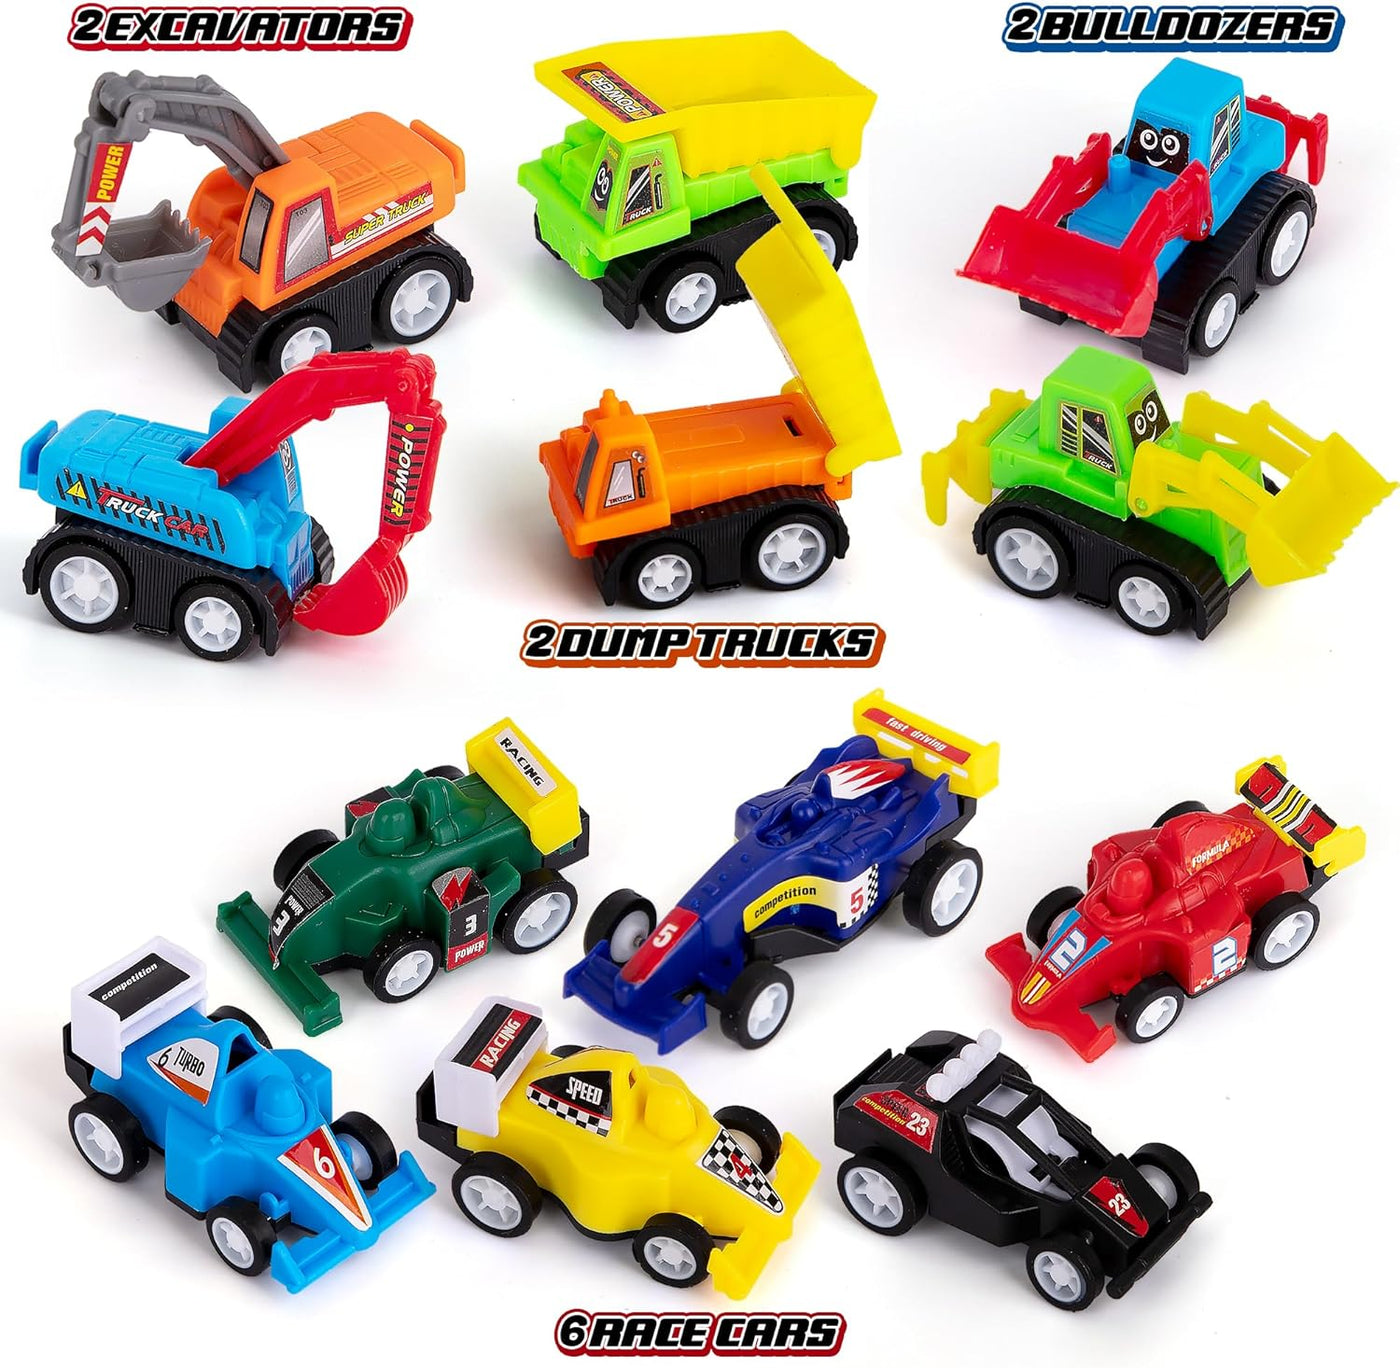 ArtCreativity Mini Pull Back Vehicles (Bulk) - Set of 12 Mini Car and Contruction Trucks - Pull Back Car Toys for Kids with Construction Vehicles and Race Cars - Fun Car Toys for Toddlers